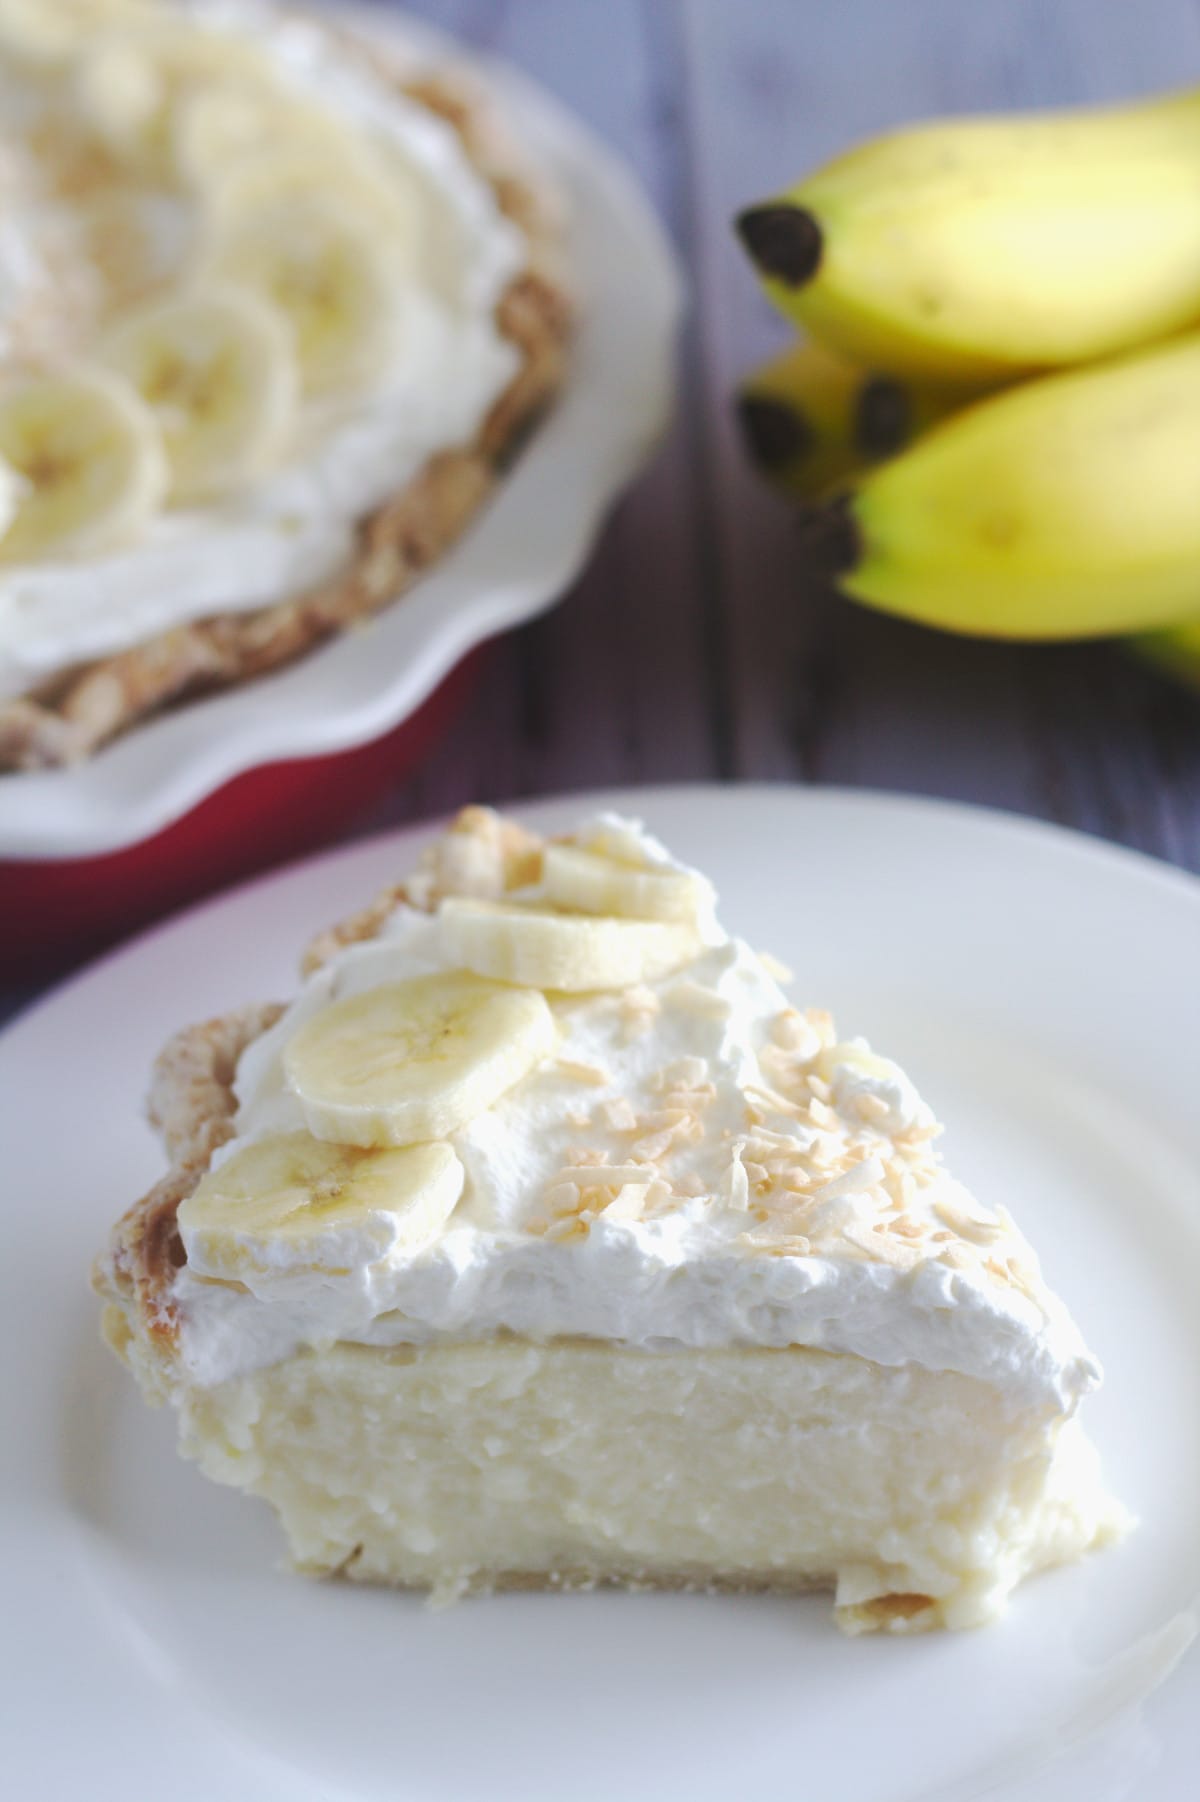 A slice of pie on a plate.  Bananas and the rest of the pie are in the background.